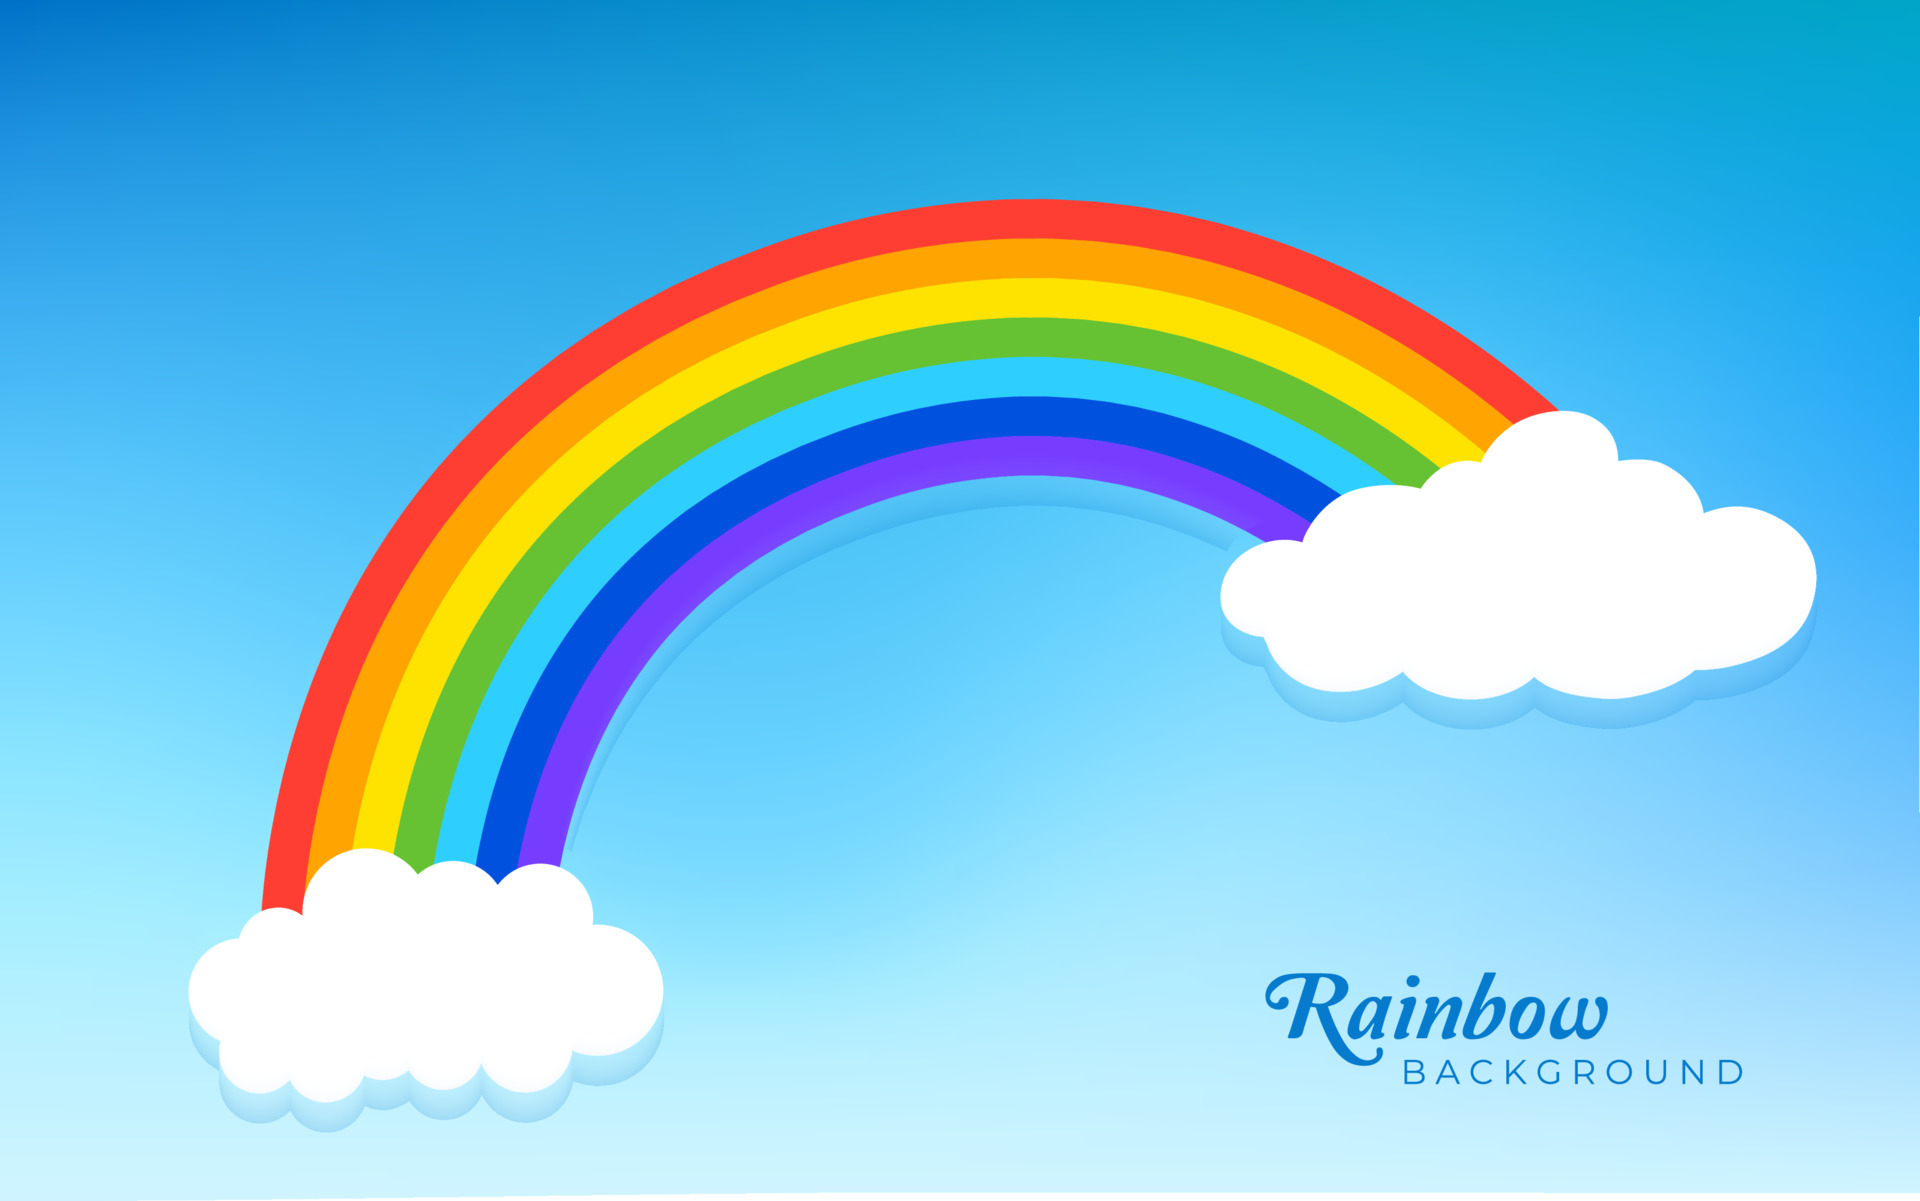 Suggested Rewrite: Stunning Collection of Over 999 Rainbow Images in Full  4K Resolution Ideal for Drawing